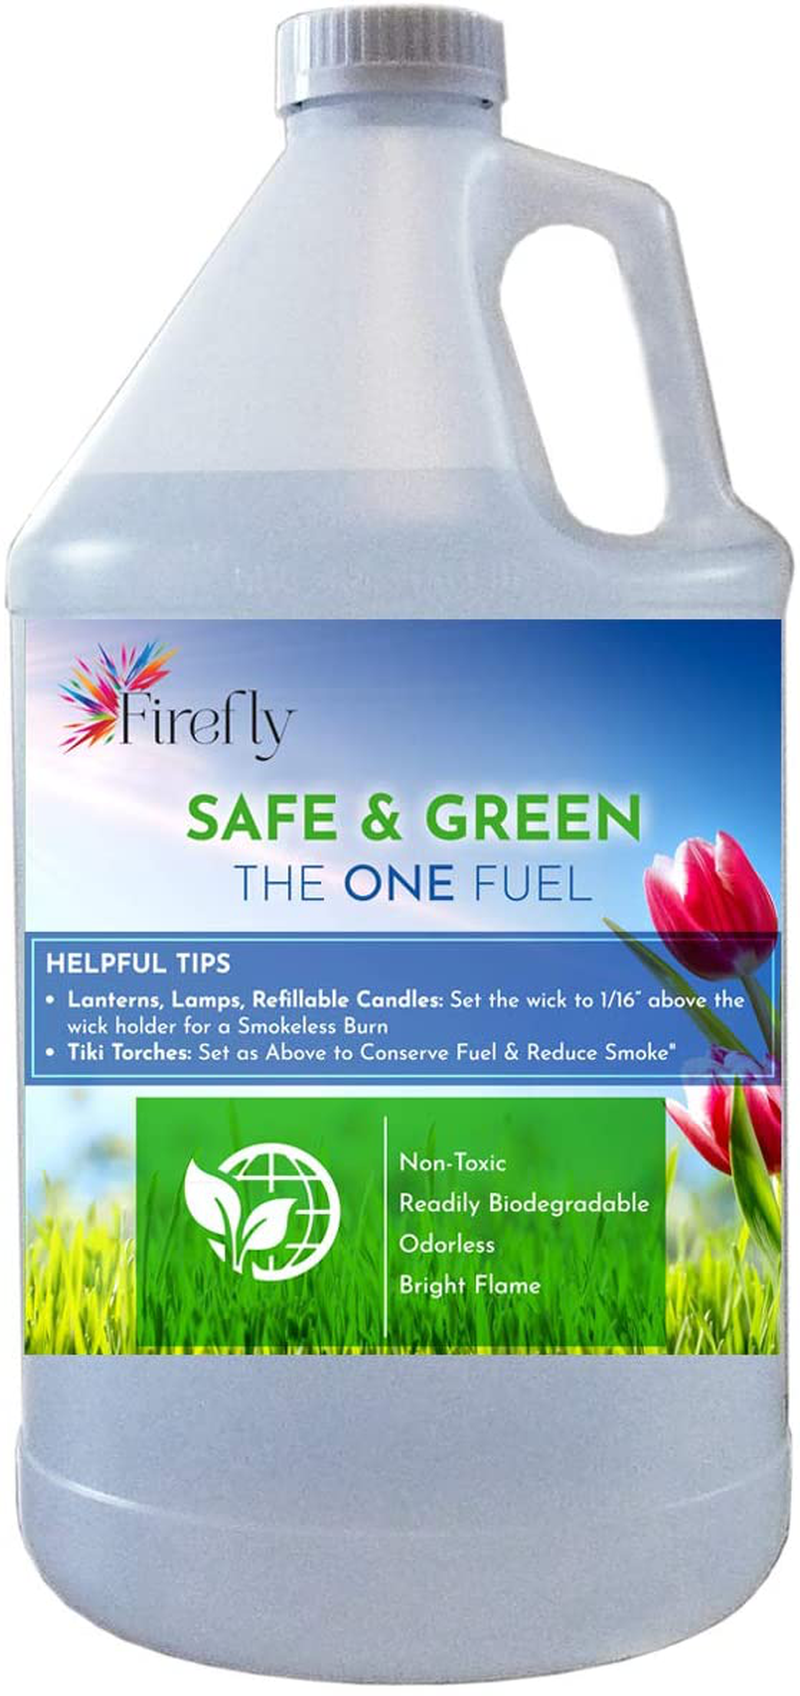 Firefly Kosher Safe and Green Eco-Friendly Lamp Oil - Non Toxic - Biodegradable - Virtually Odorless - Paraffin Alternative - Indoor Outdoor Use - Lamps, Lanterns, Candles, Patio Tiki Torches - 16 Oz Home & Garden > Lighting Accessories > Oil Lamp Fuel Firefly 1 Gallon  